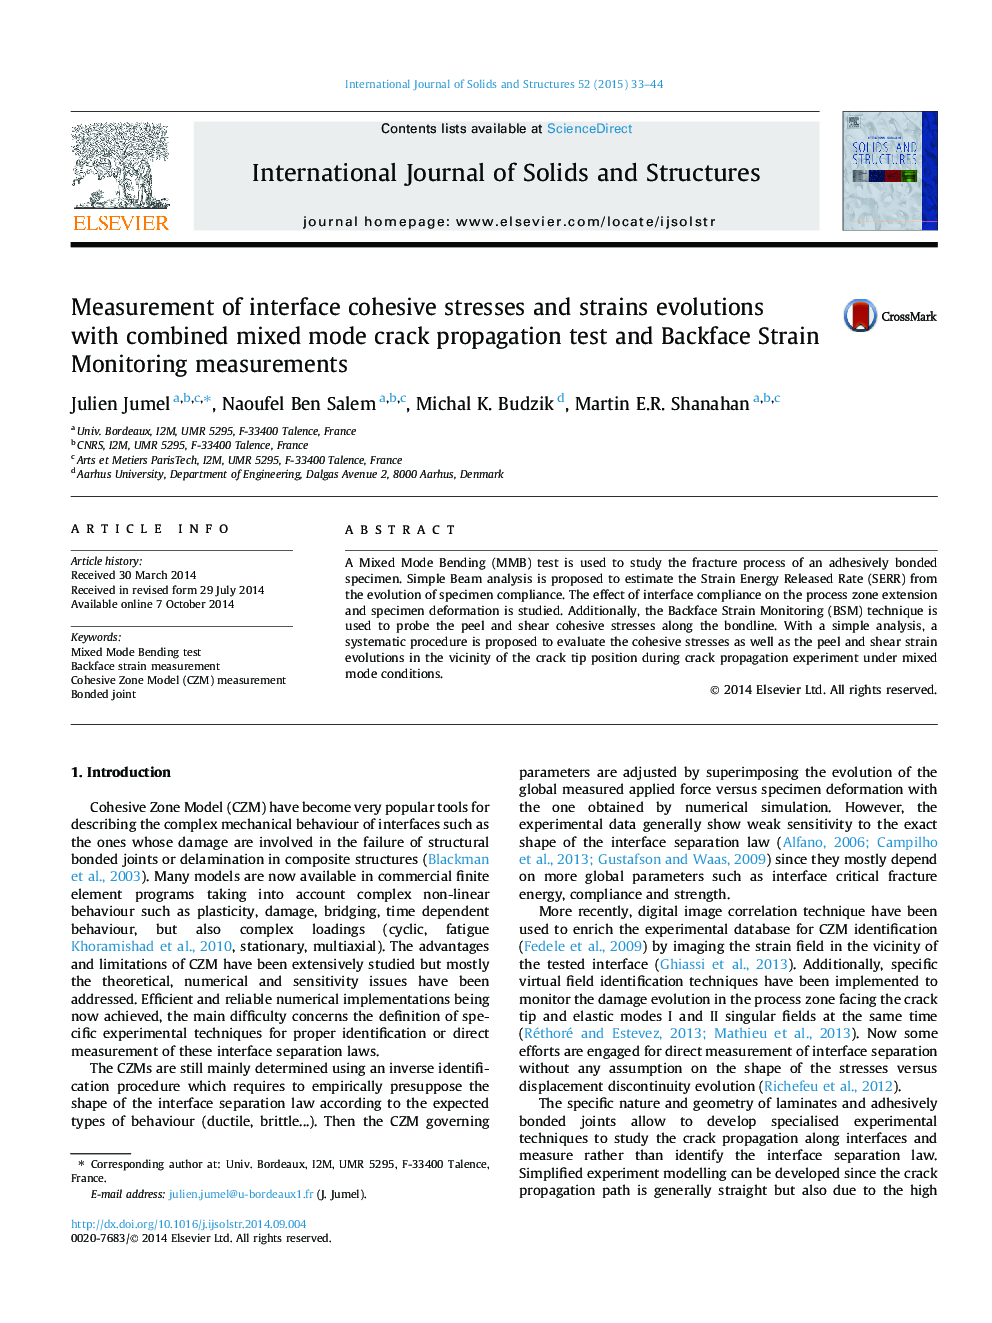 Measurement of interface cohesive stresses and strains evolutions with combined mixed mode crack propagation test and Backface Strain Monitoring measurements